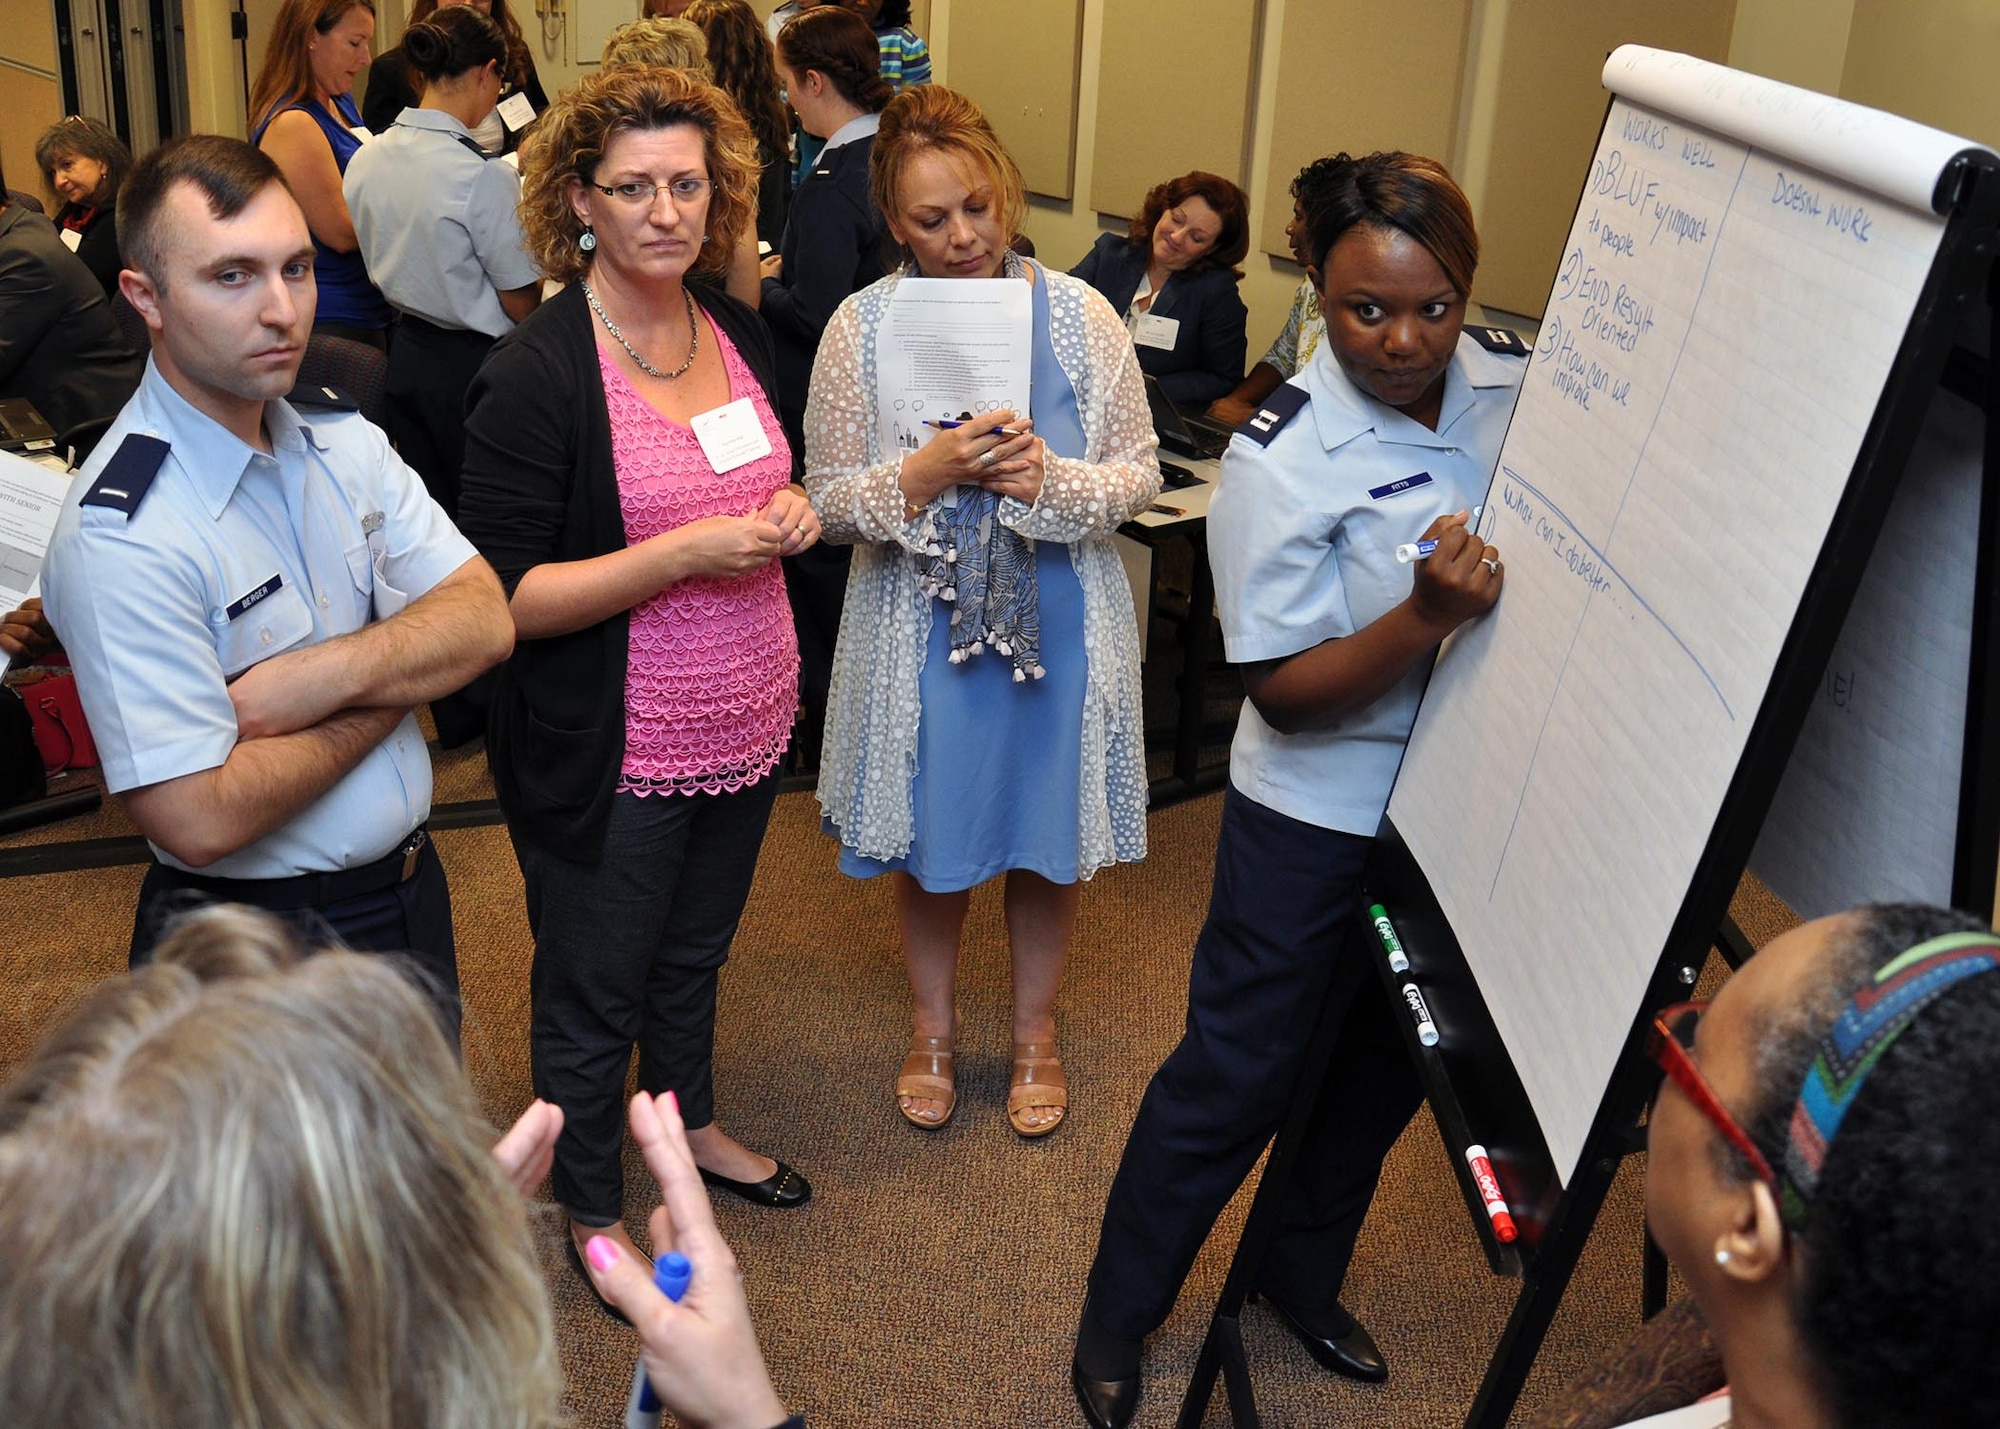 Air Force sexual assault response coordinators brainstorm ideas on improving communication with leadership at all levels Aug. 5, 2015, at the National Conference Center in Leesburg, Va. Nearly 130 SARCs from across the Air Force attended the training, which included lessons on prevention, policy, training and leadership interaction. (U.S. Air Force photo/Tech. Sgt. Bryan Franks)